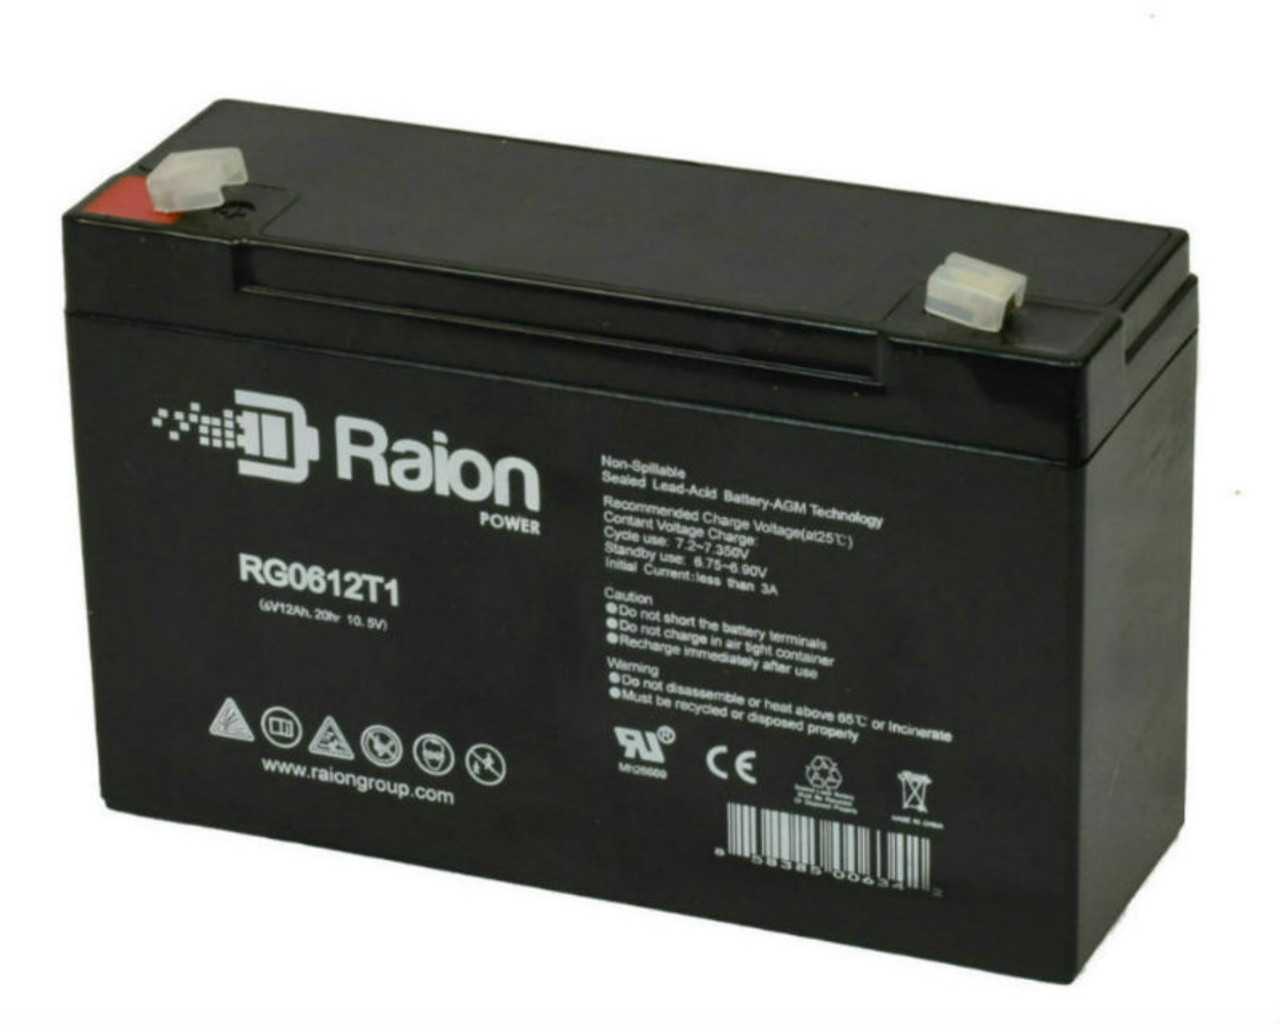 Raion Power RG06120T1 Replacement 6V 12Ah Emergency Light Battery for Siltron ELP1010